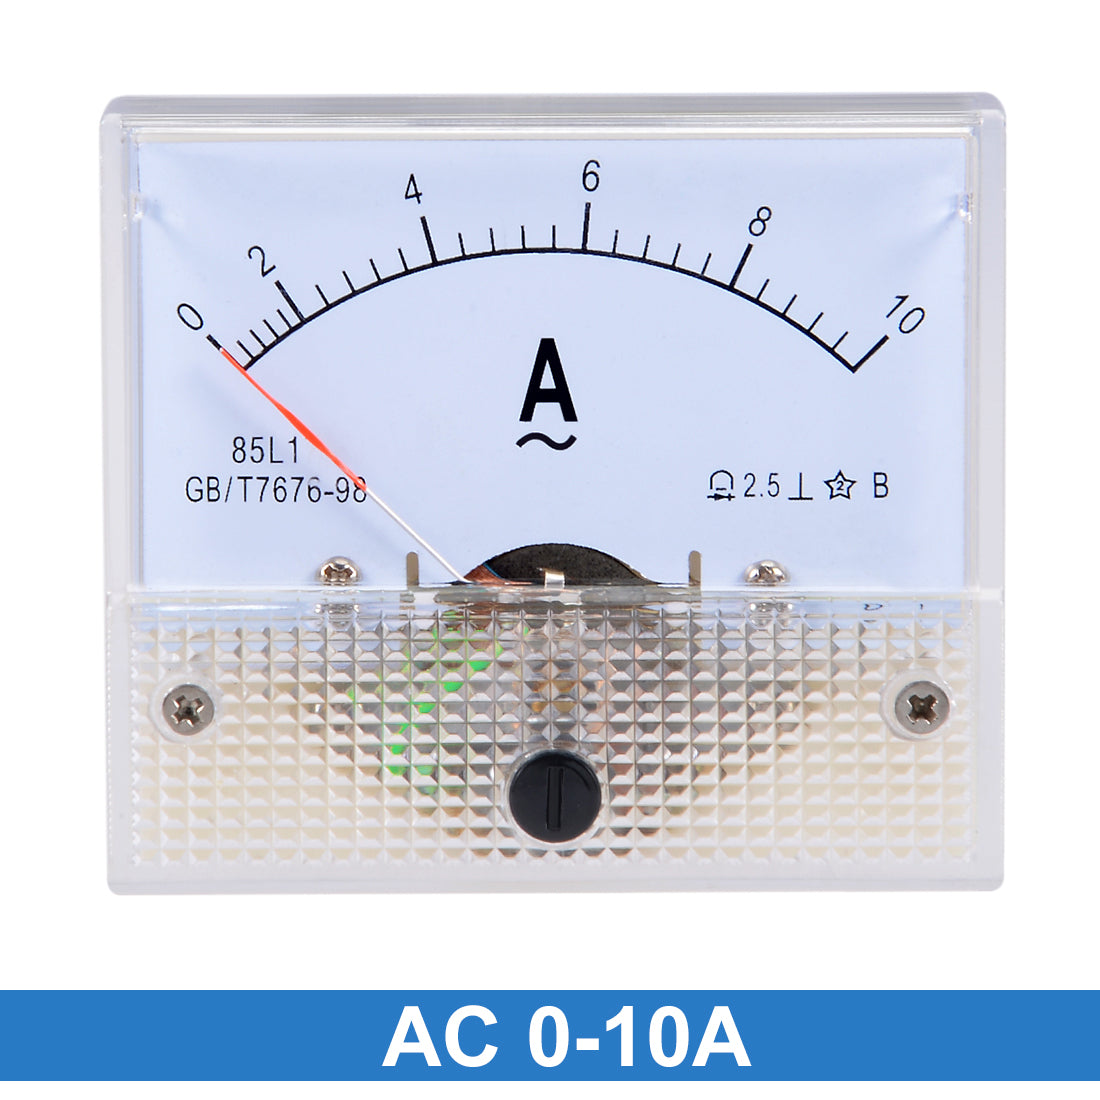 uxcell Uxcell AC 0-10A Analog Panel Ammeter Gauge Ampere Current Meter 85L1